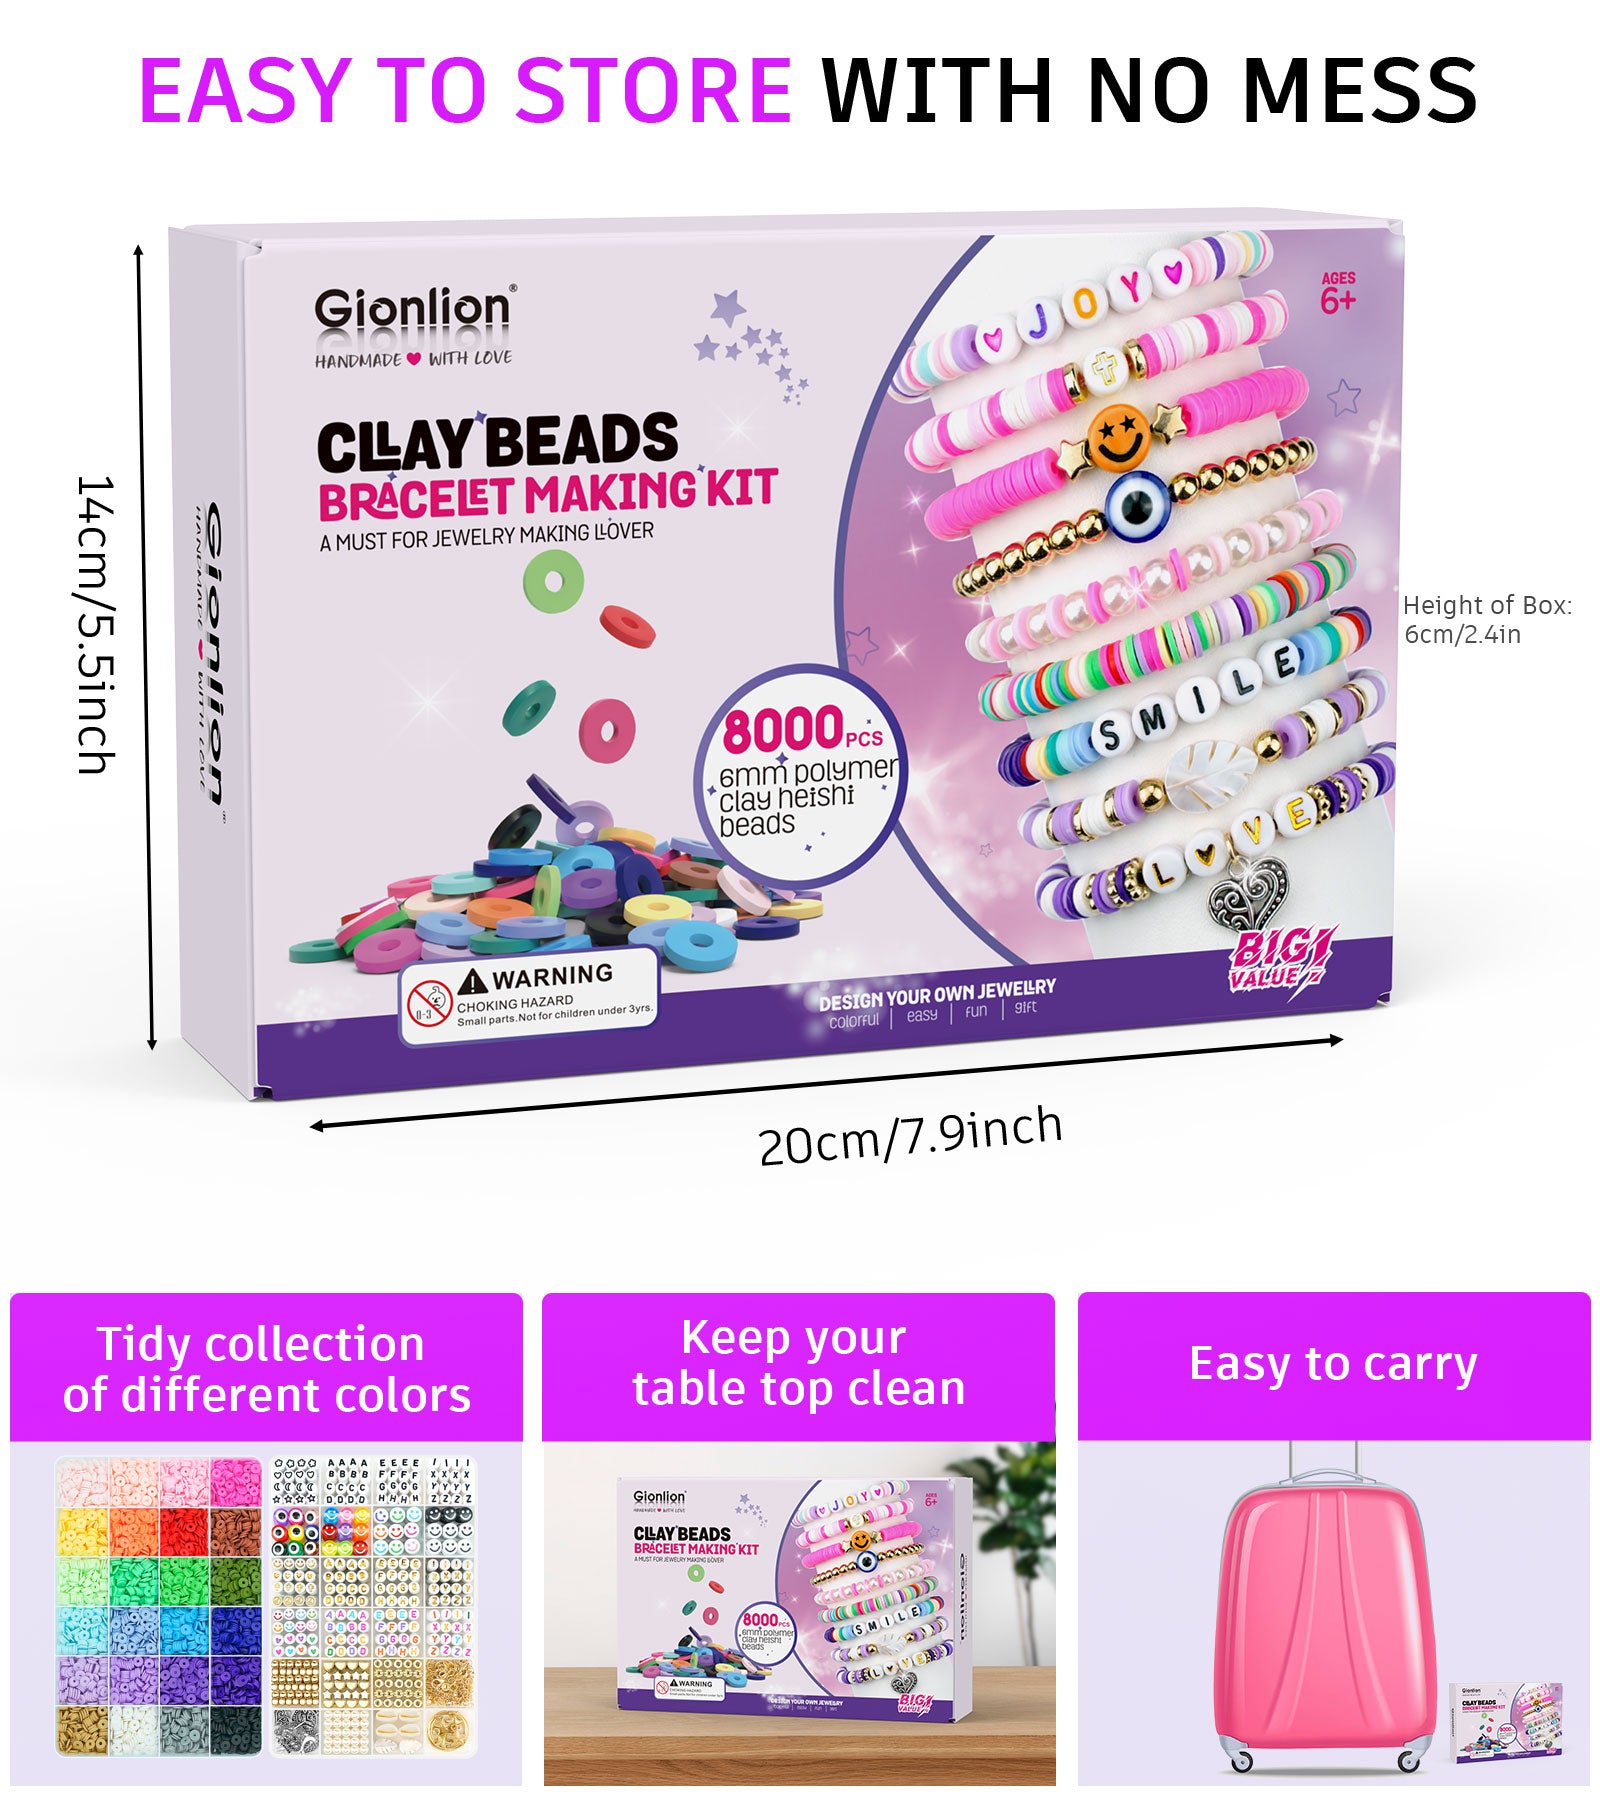 Gionlion 8000 Pcs Clay Beads Kit 2 Boxes for Bracelet Making, 24 Colors  Flat Clay Beads Letter Beads Spacer Beads and Charms Kit for Jewelry Making,  Jewelry Supplies Crafts Gift for Teen